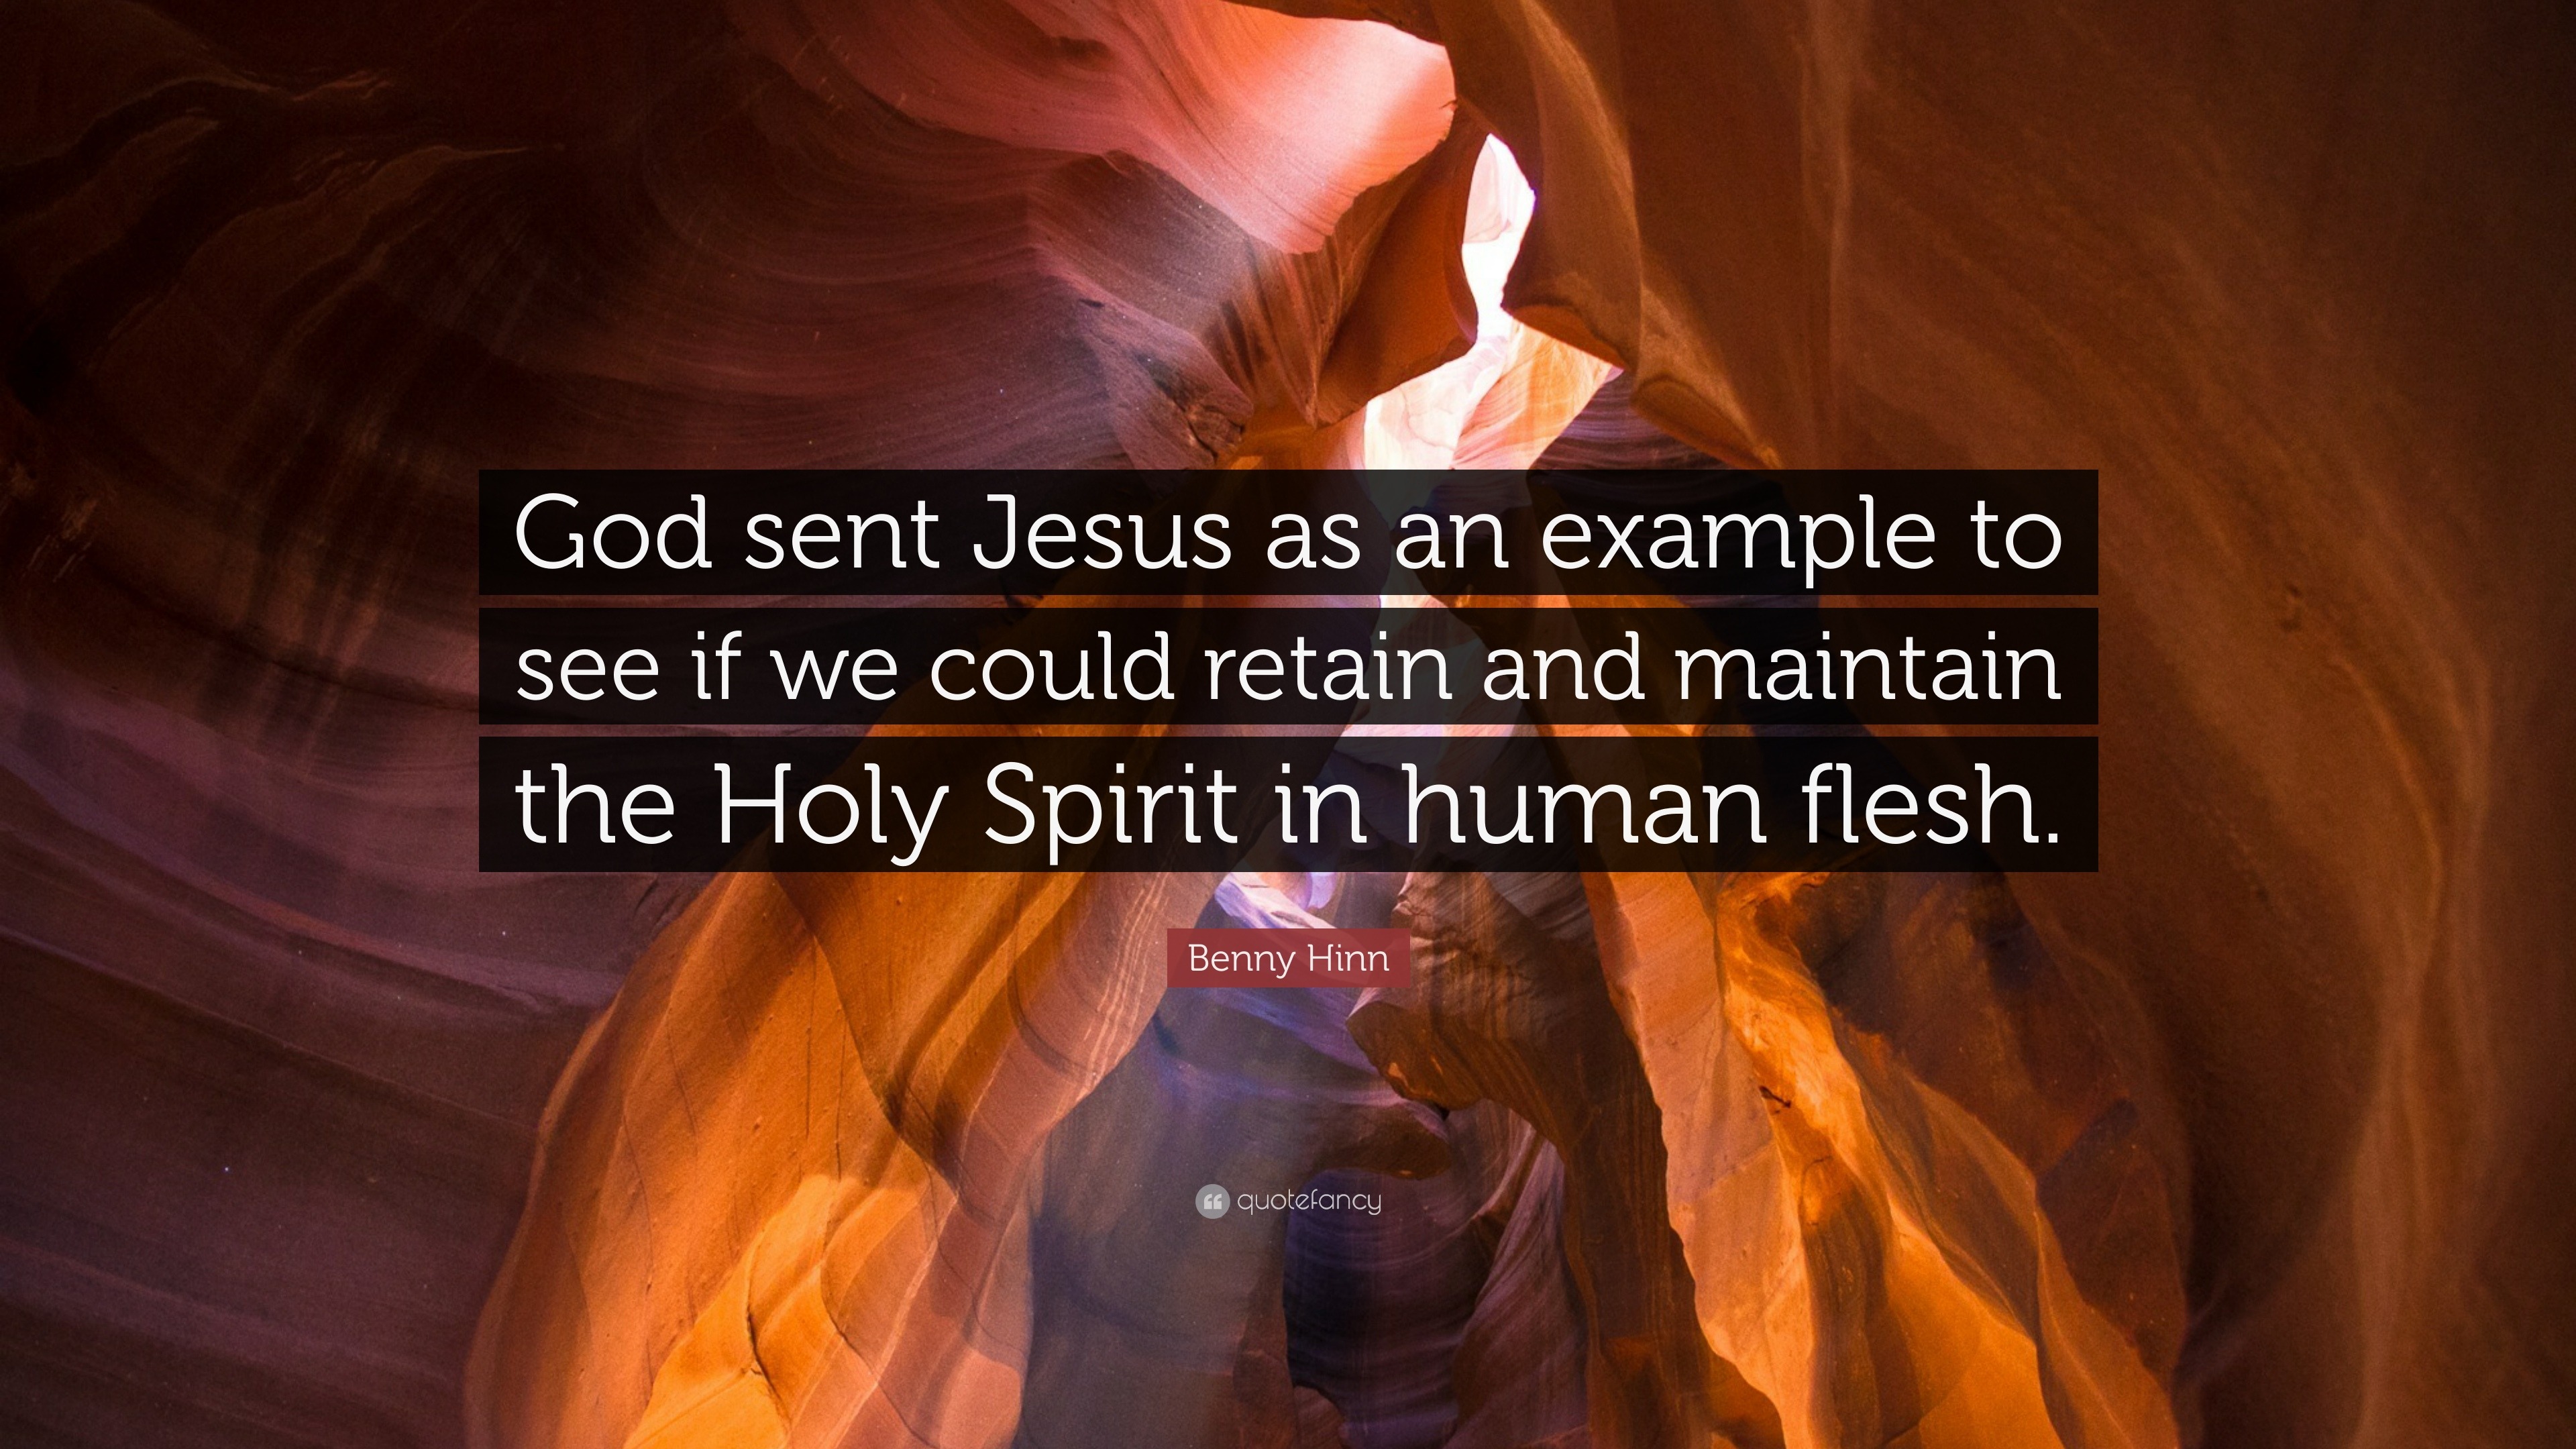 Benny Hinn Quote: “God sent Jesus as an example to see if we could retain  and